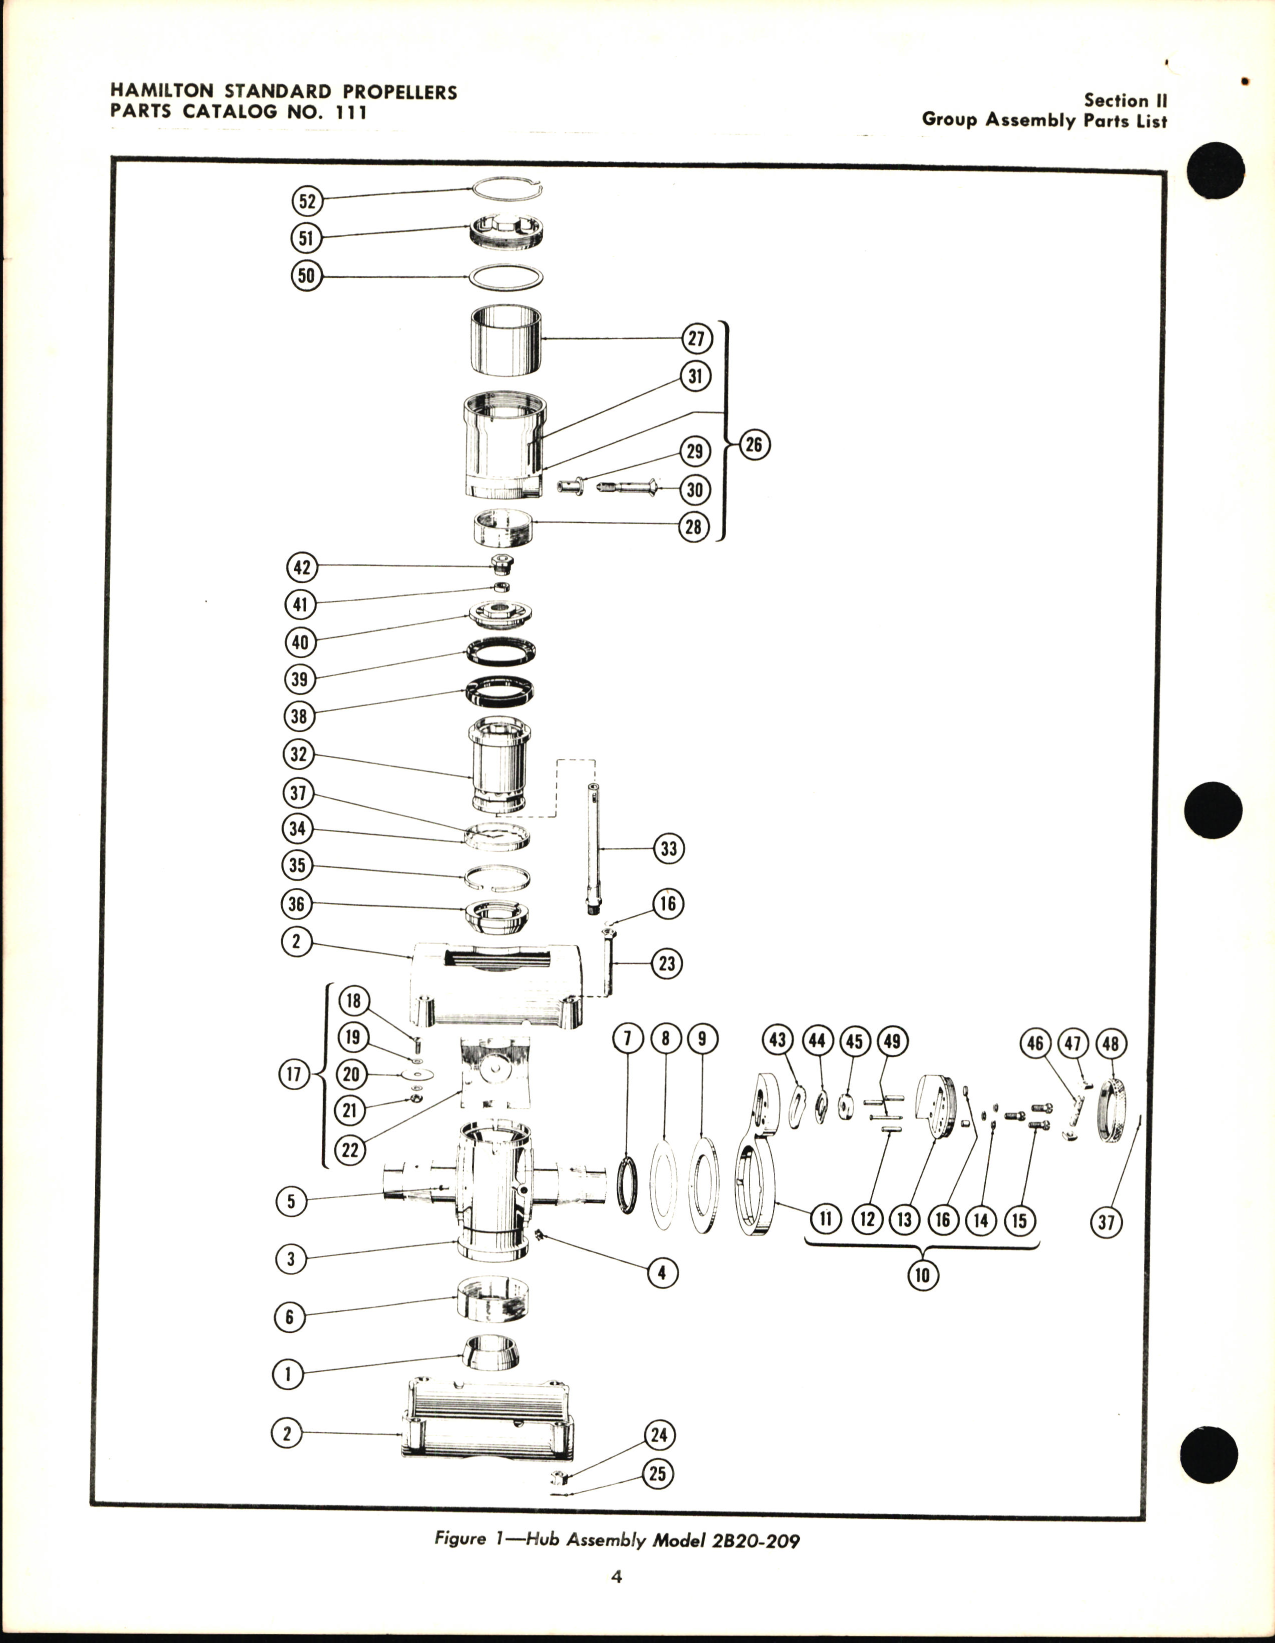 Sample page 6 from AirCorps Library document: Parts Catalog for Counterweight Propellers